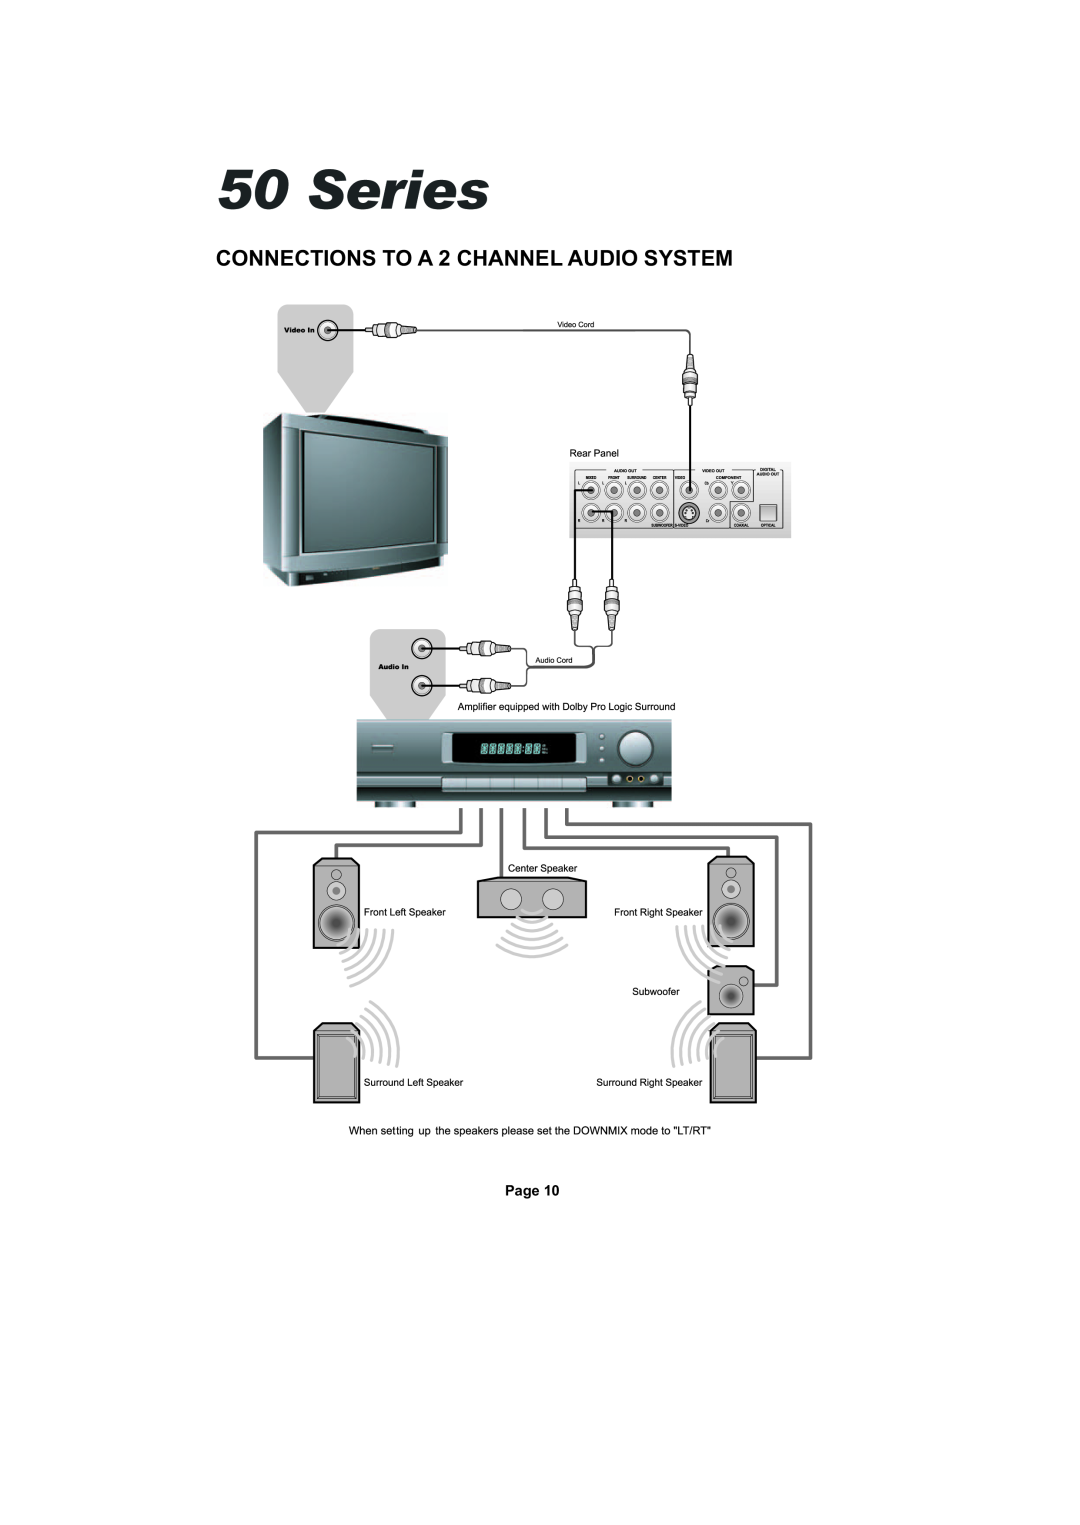 Cambridge Audio SERIES50 owner manual CONNECTIONS TO A 2 CHANNEL AUDIO SYSTEM, Series, Page 